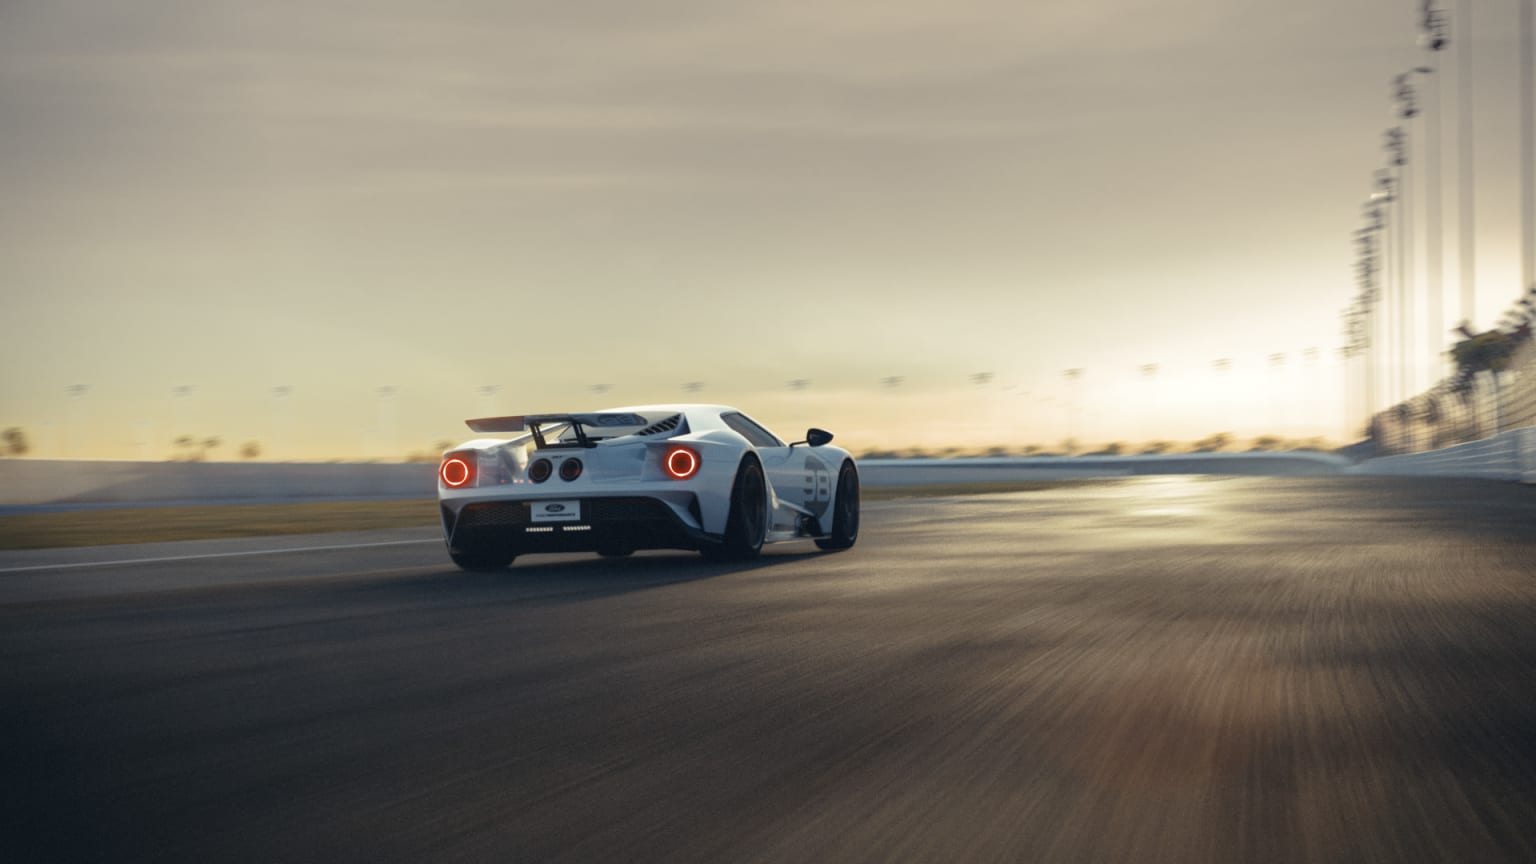 a white sports car driving down a race track at sunset or sunrise or sunset, with the sun shining on the rear end of the car